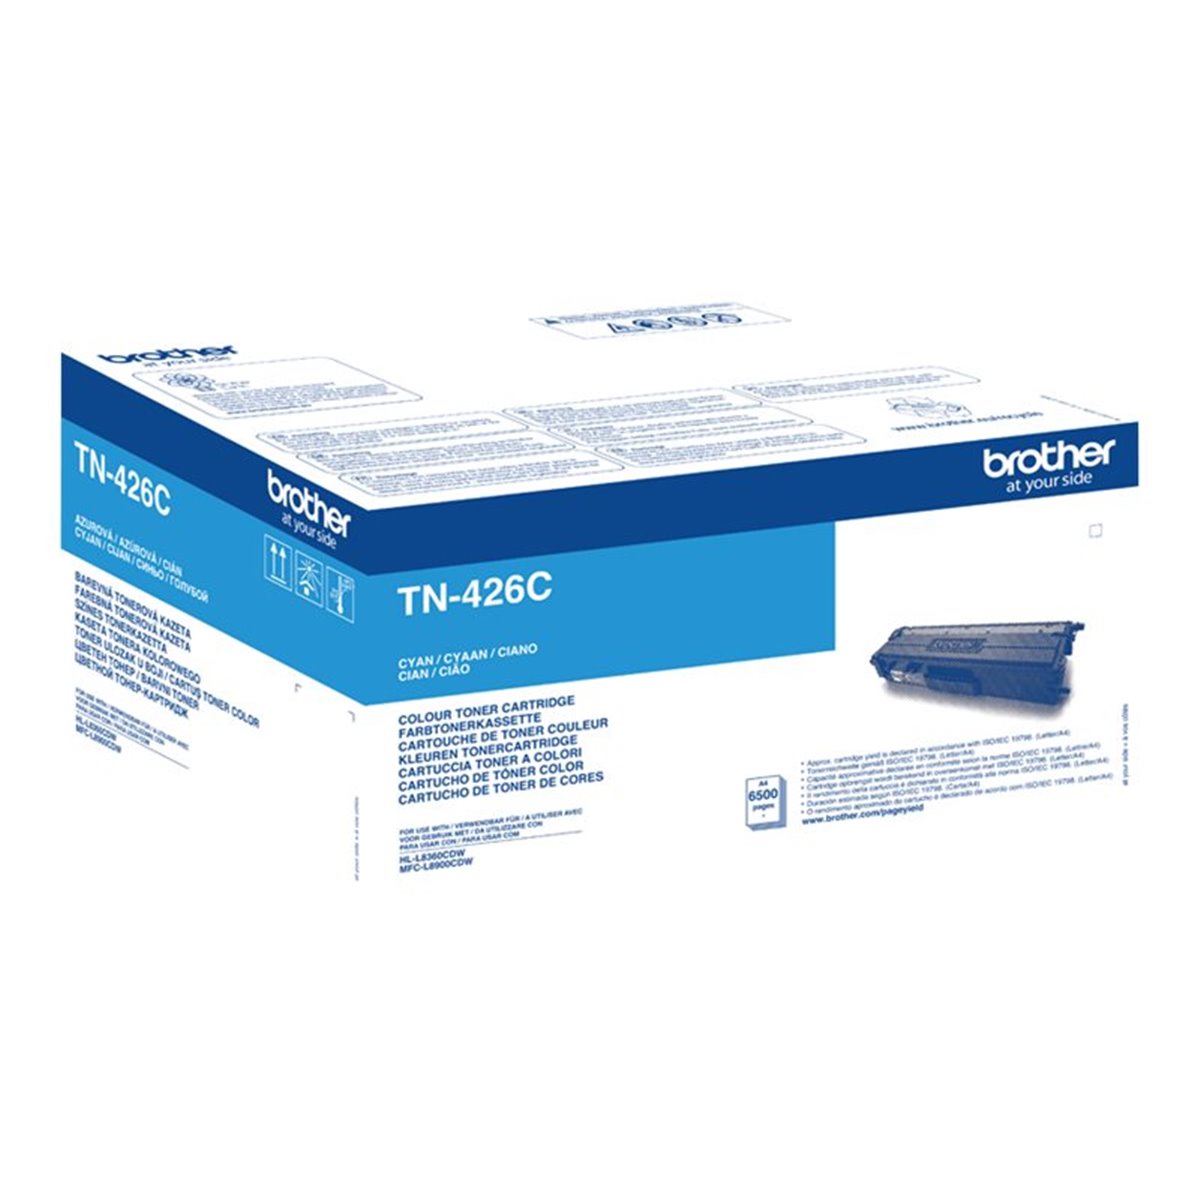 TN426C Toner Cartridge Cyan Super High Capacity 6.500 pages for HLL8260CDW, L8360CDW